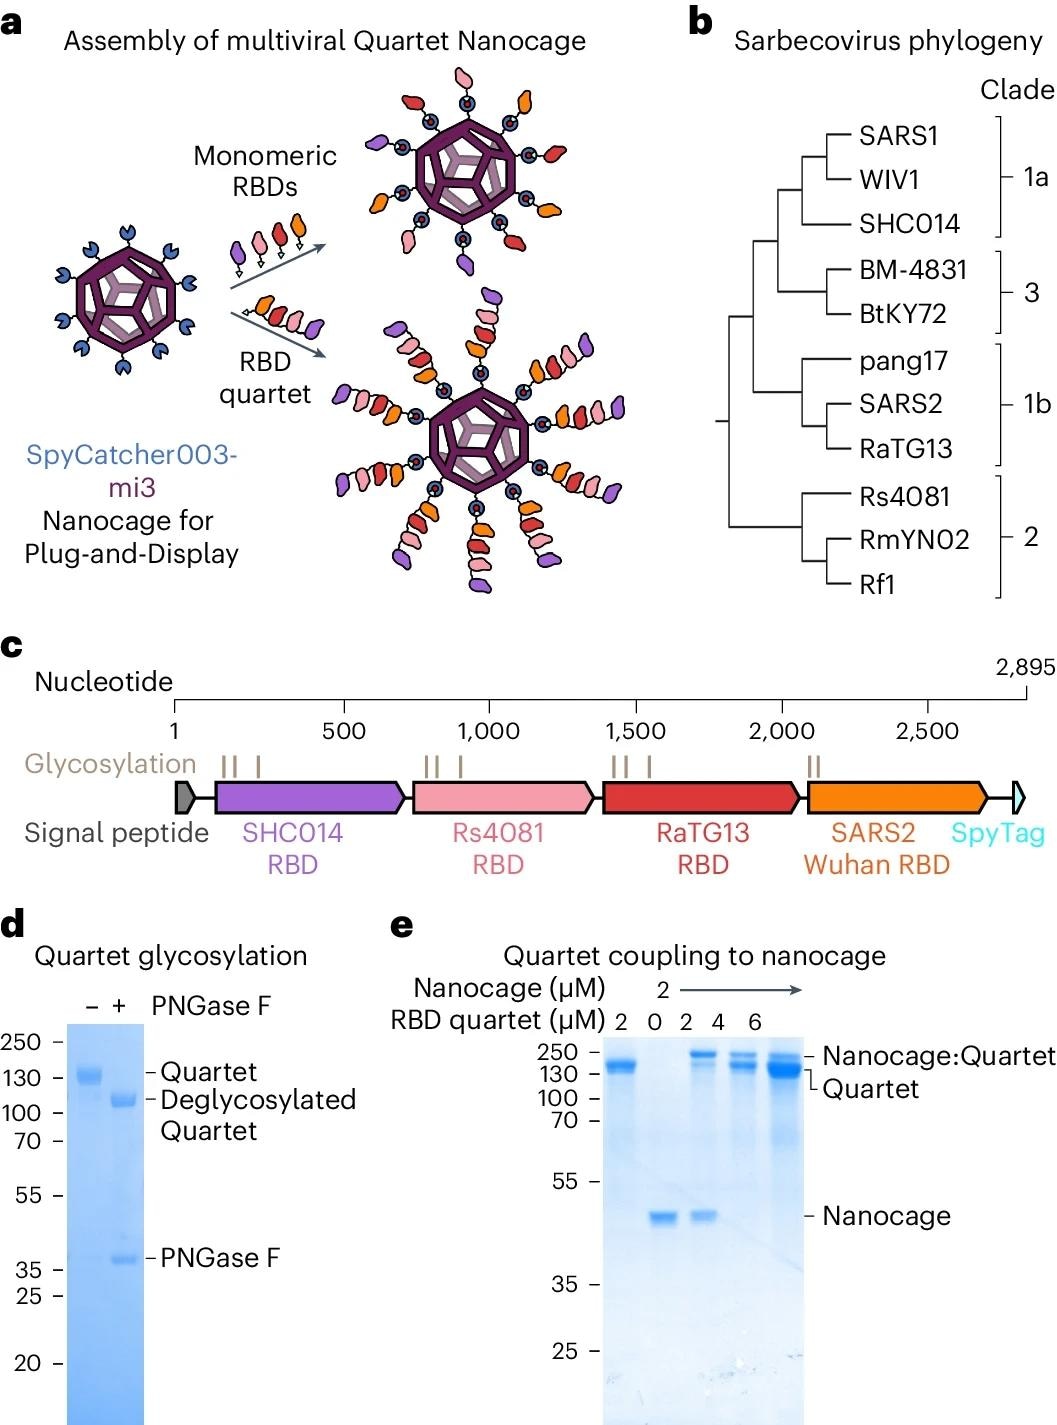 a, Plug-and-Display vaccine assembly of mosaic and Quartet Nanocages. Genetic fusion of SpyCatcher003 (dark blue) with mi3 (purple) allows efficient multimerization of single or Quartet RBDs linked to SpyTag (cyan) through spontaneous isopeptide bond formation (marked in red). Only some antigens are shown in the schematic for clarity. b, Phylogenetic tree of sarbecoviruses used in this study, based on RBD sequence. c, Genetic organization of the multiviral Quartet-SpyTag, indicating the viral origin of RBDs, N-linked glycosylation sites and tag location. d, Analysis of Quartet-SpyTag with SDS–PAGE/Coomassie staining, with or without PNGase F deglycosylation. A representative gel from two independent experiments. Molecular weight markers are in kDa. e, Coupling of RBD Quartet to SpyCatcher003-mi3 Nanocage at different molar Nanocage:antigen ratios, analysed by SDS–PAGE/Coomassie. A representative gel from two independent experiments. Molecular weight markers are in kDa.